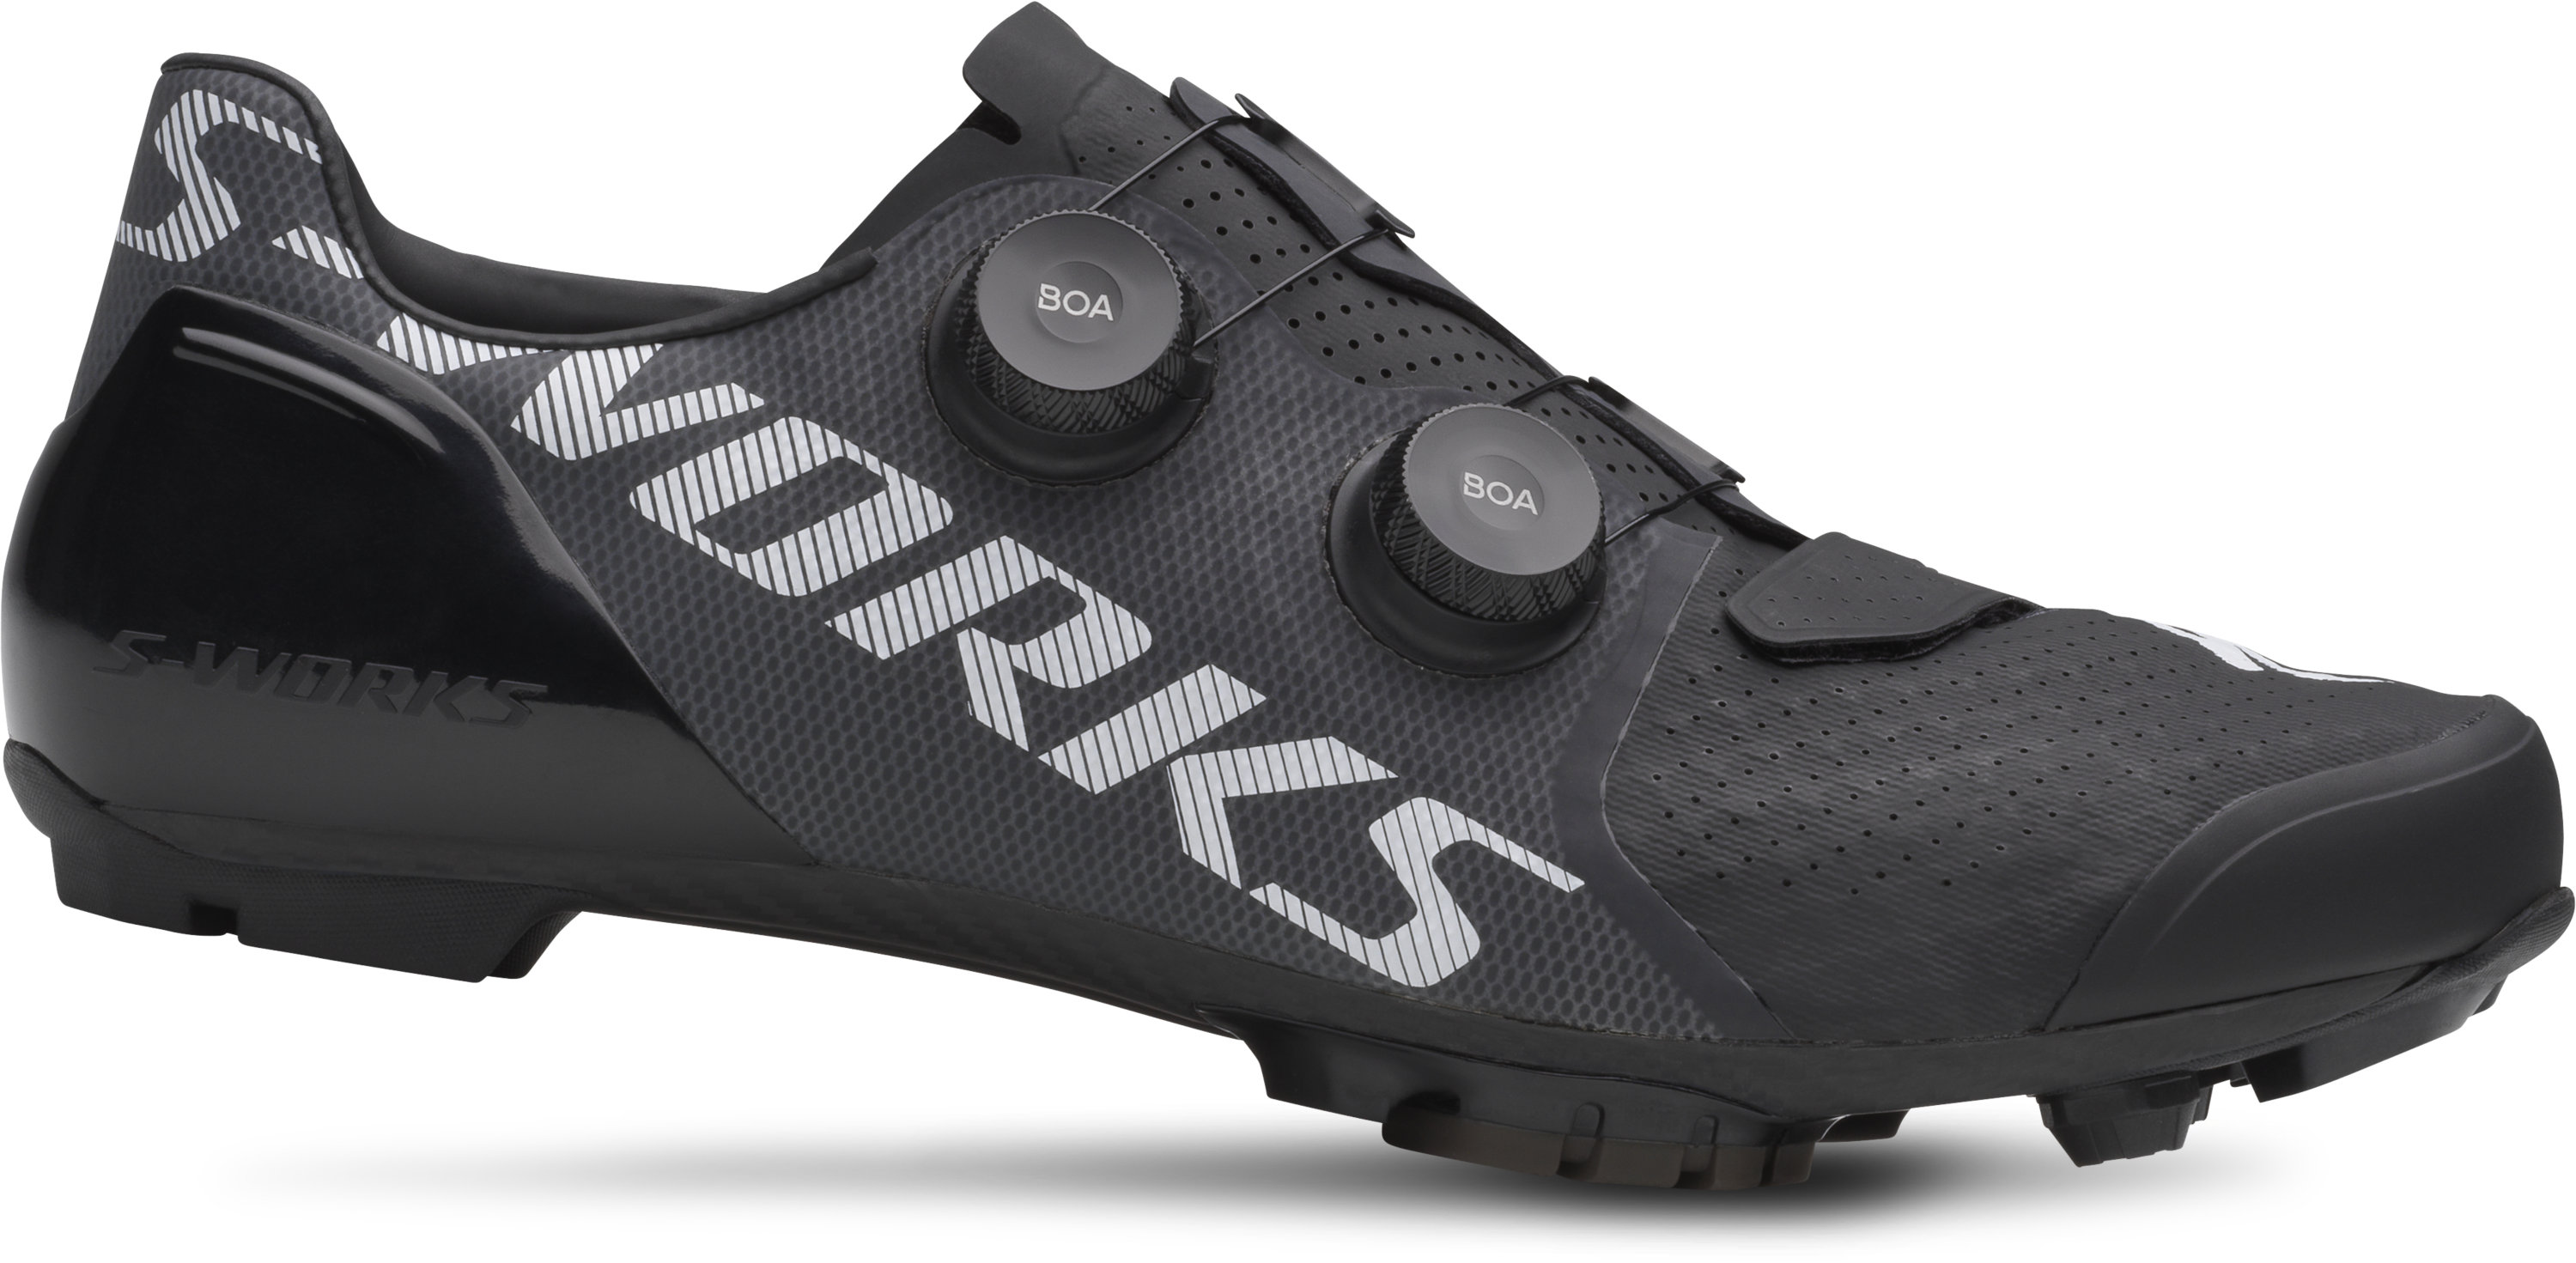 S-Works Recon Mountain Bike Shoes 